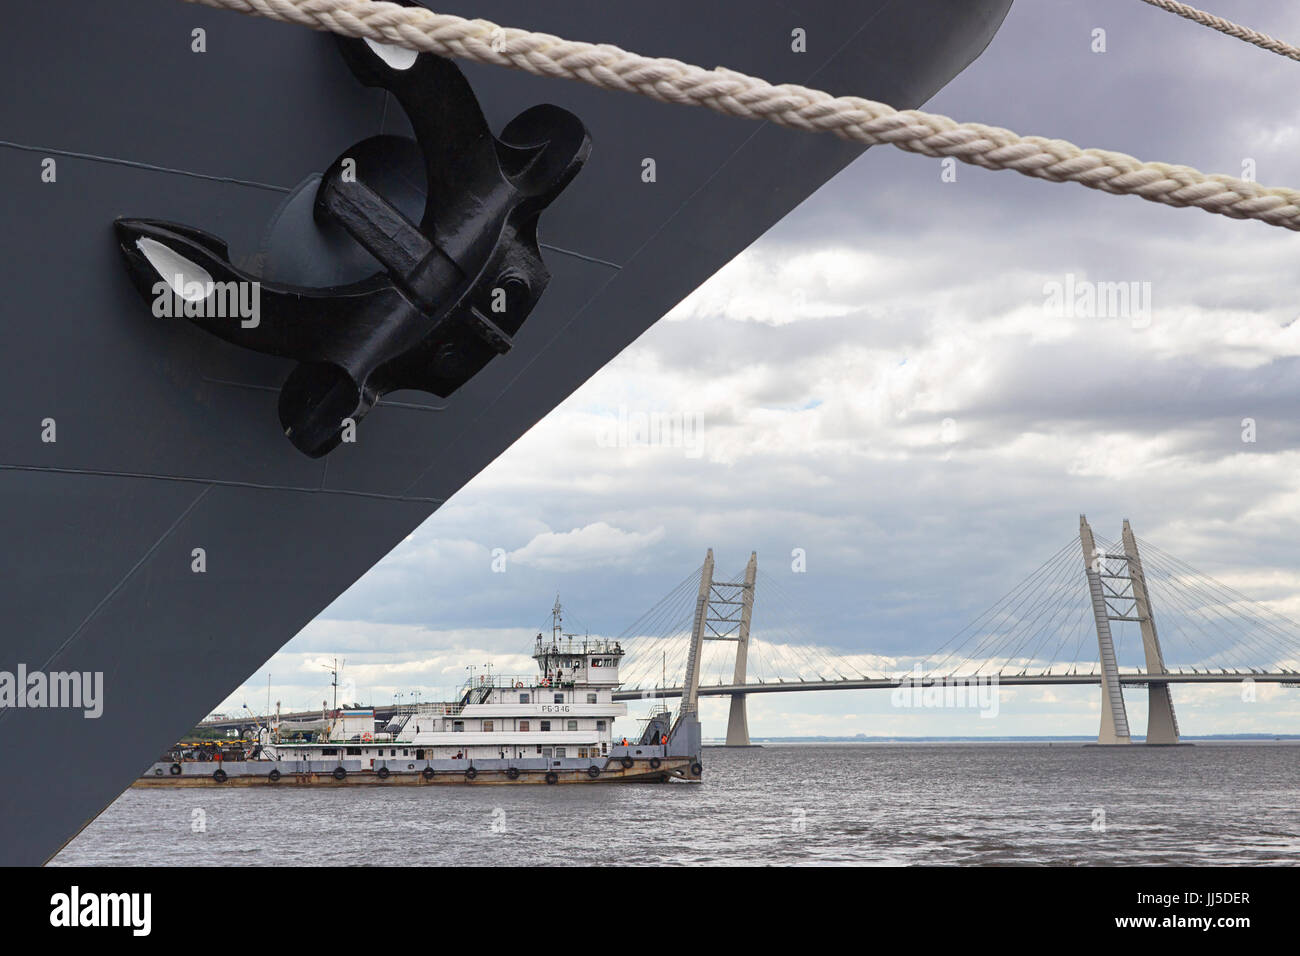 Anchor of the warship against a background of the cable-stayed bridge over the ship's fairway Stock Photo